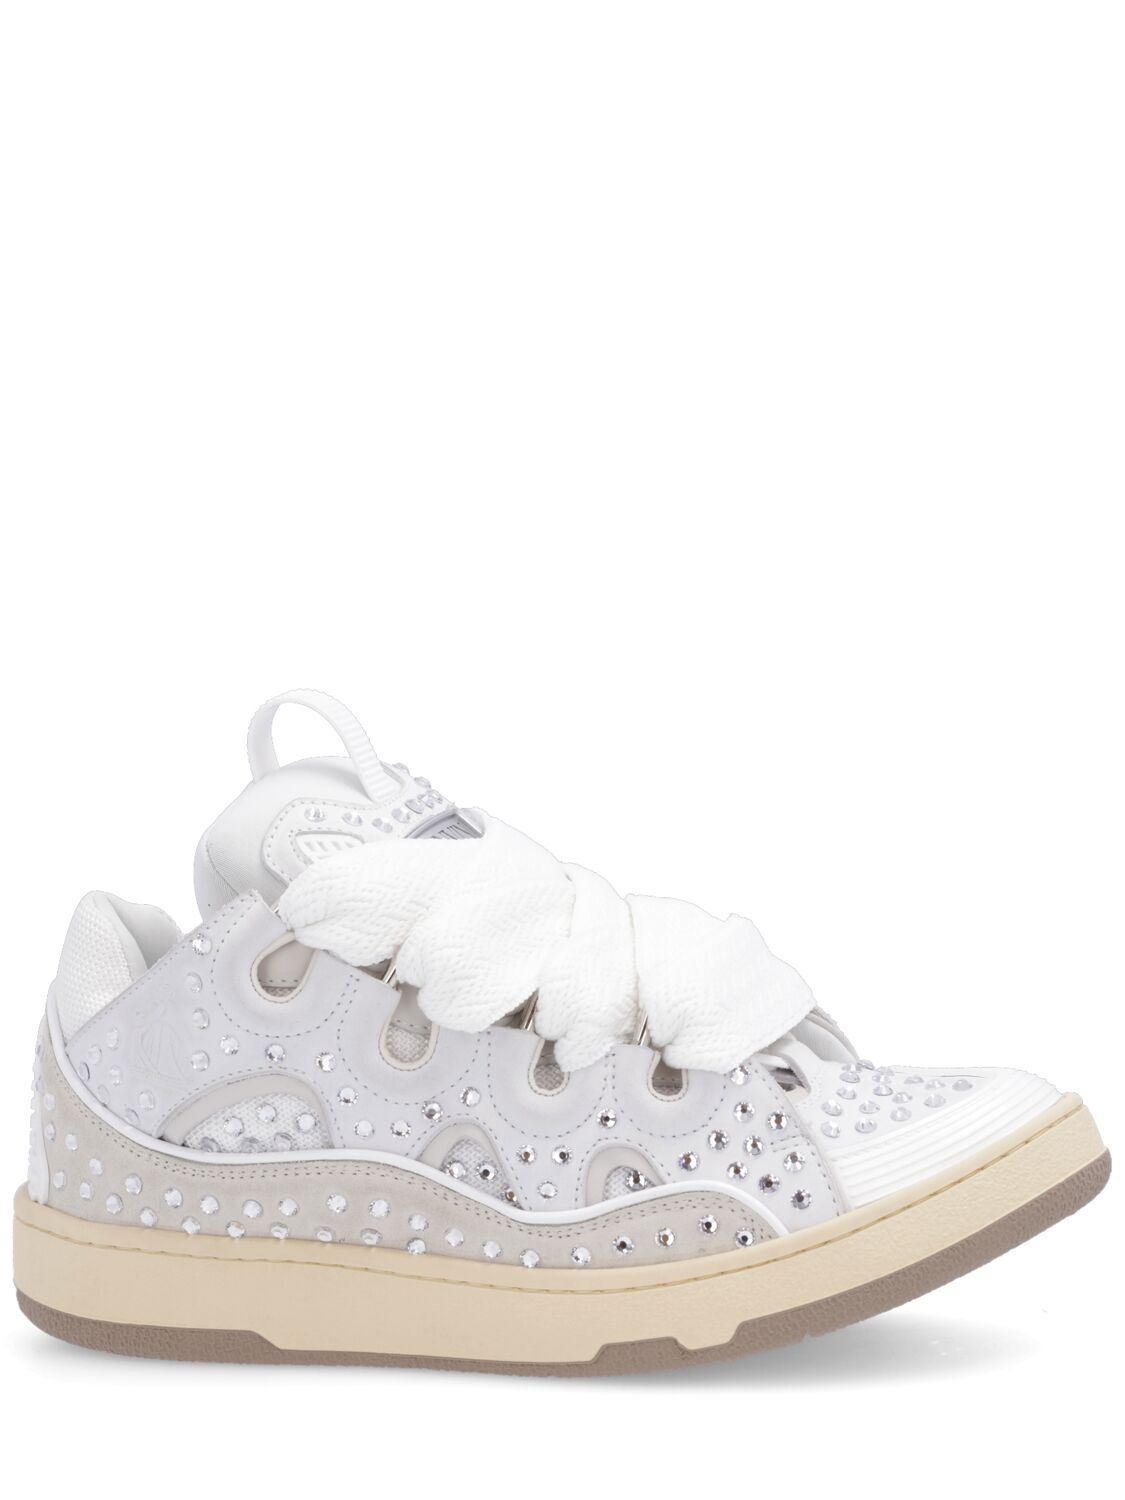 Shop Lanvin Curb Embellished Leather Sneakers In Ivory